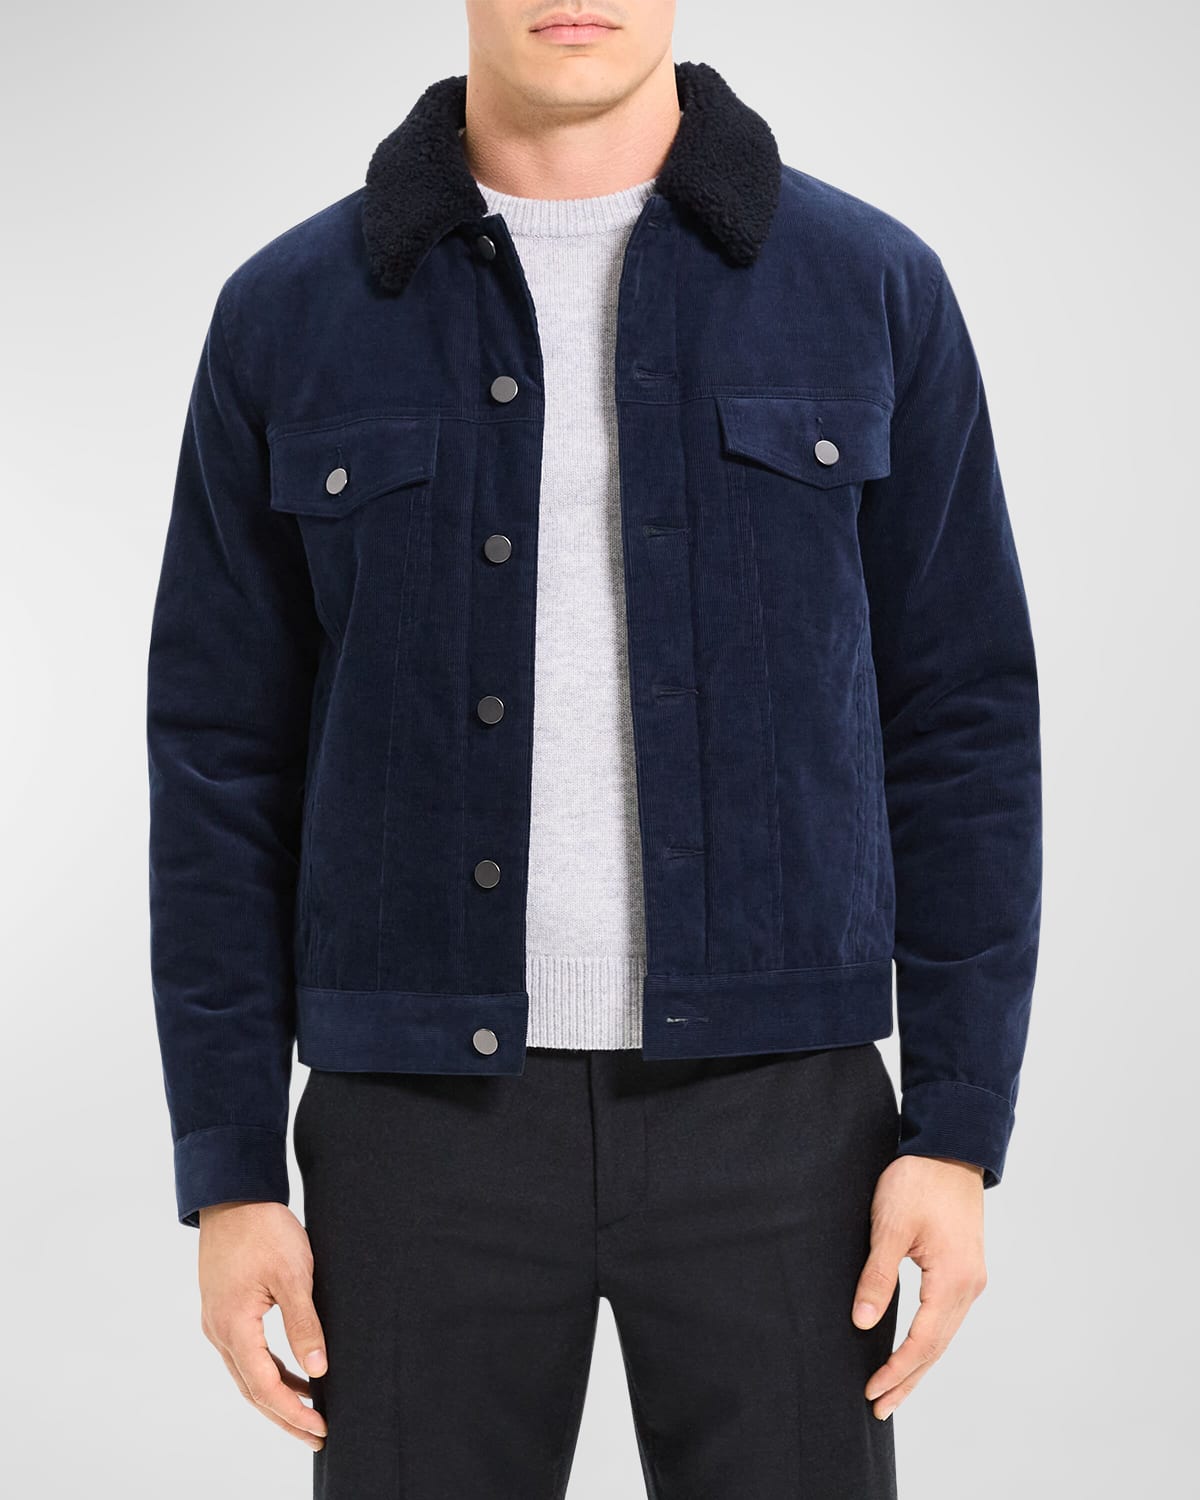 THEORY MEN'S NEIL JACKET IN STRETCH CORD